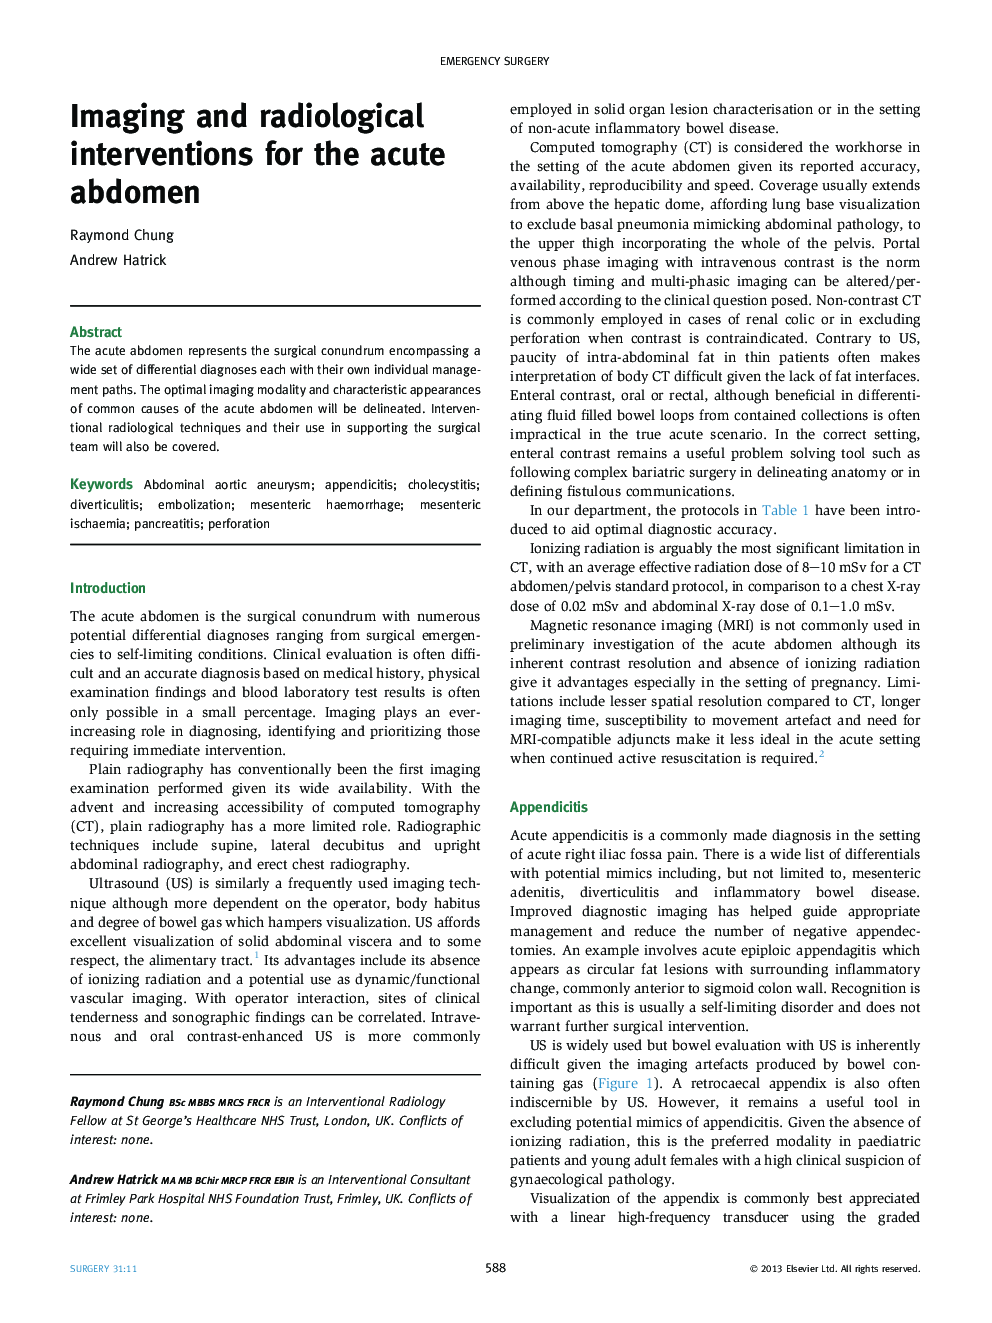 Imaging and radiological interventions for the acute abdomen